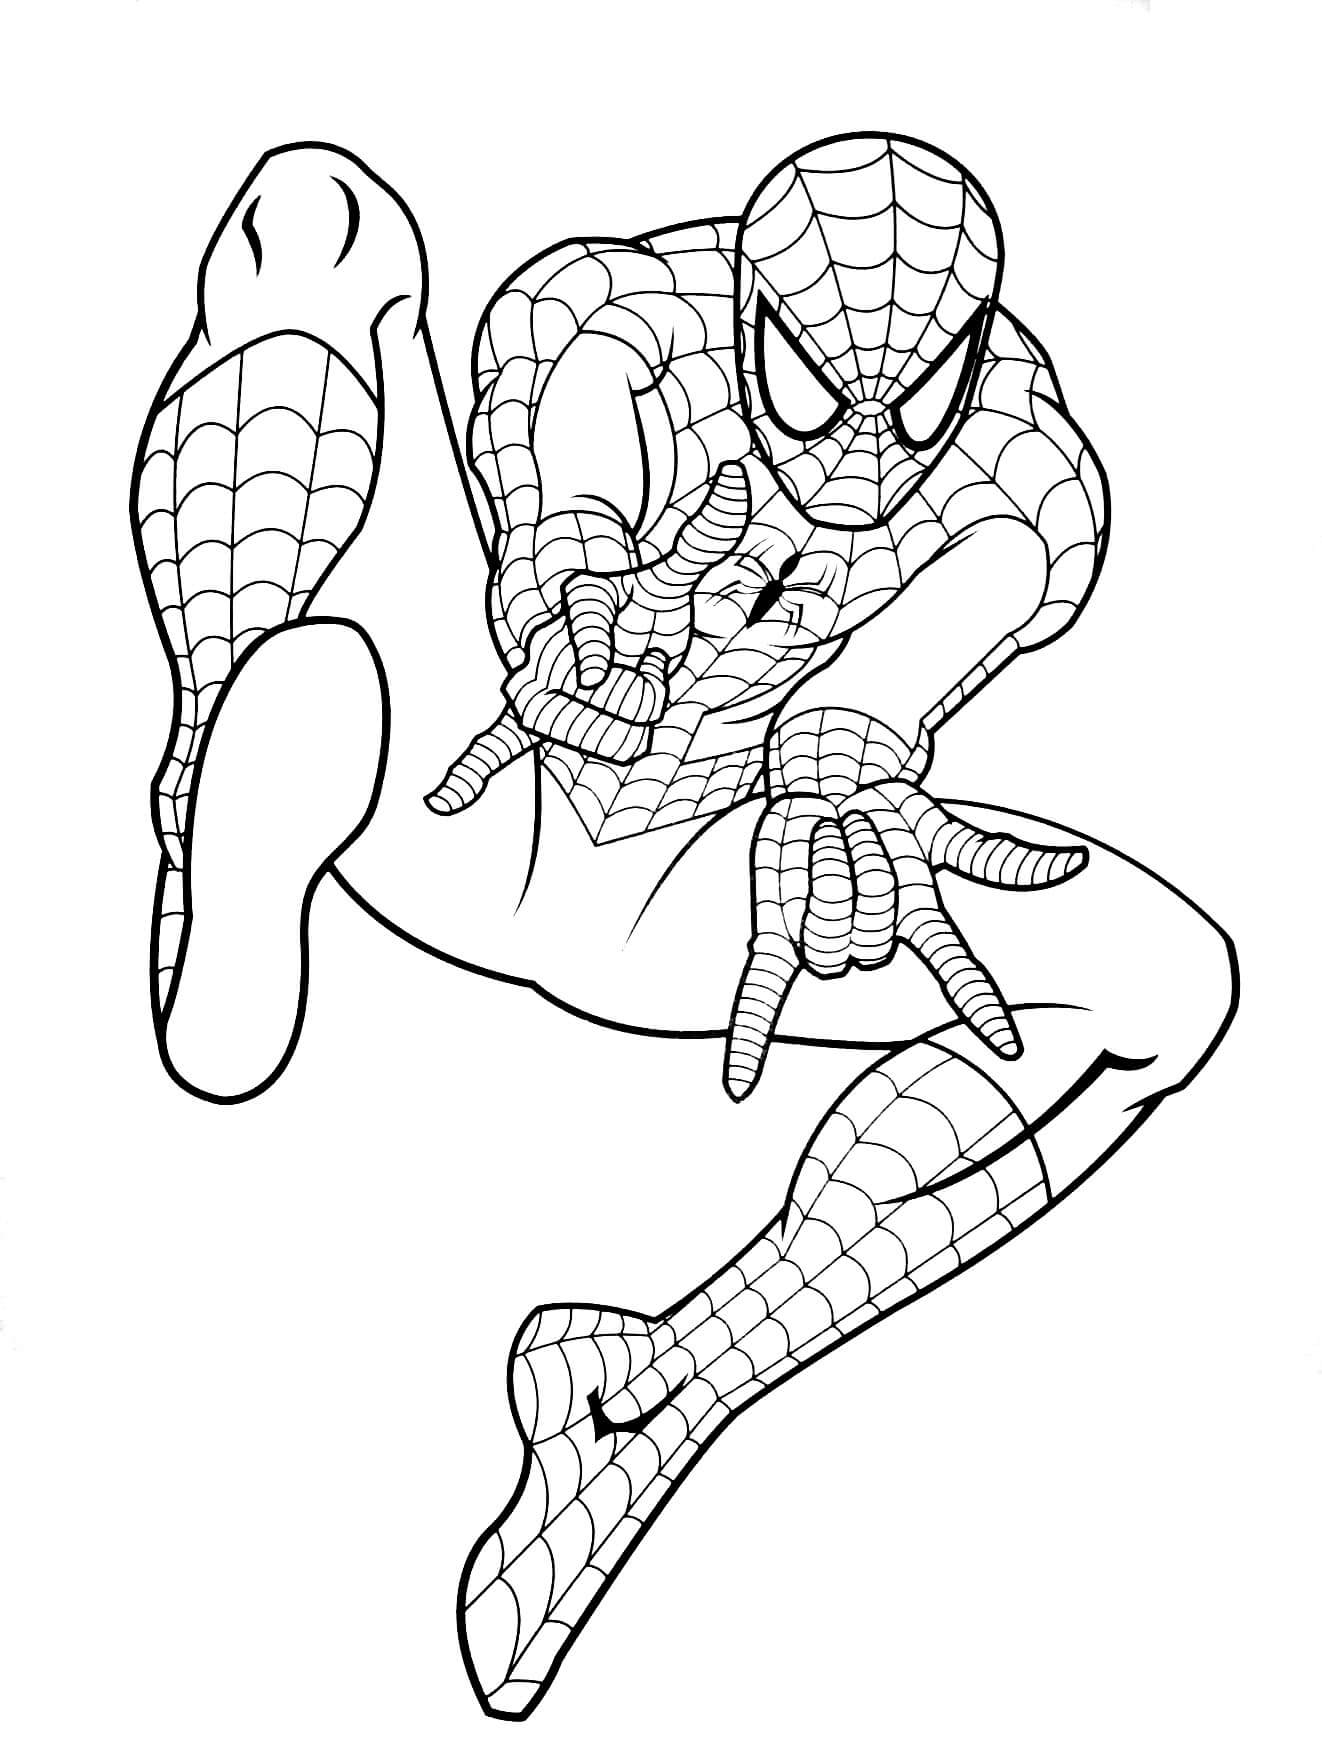 Spiderman 9 coloring page